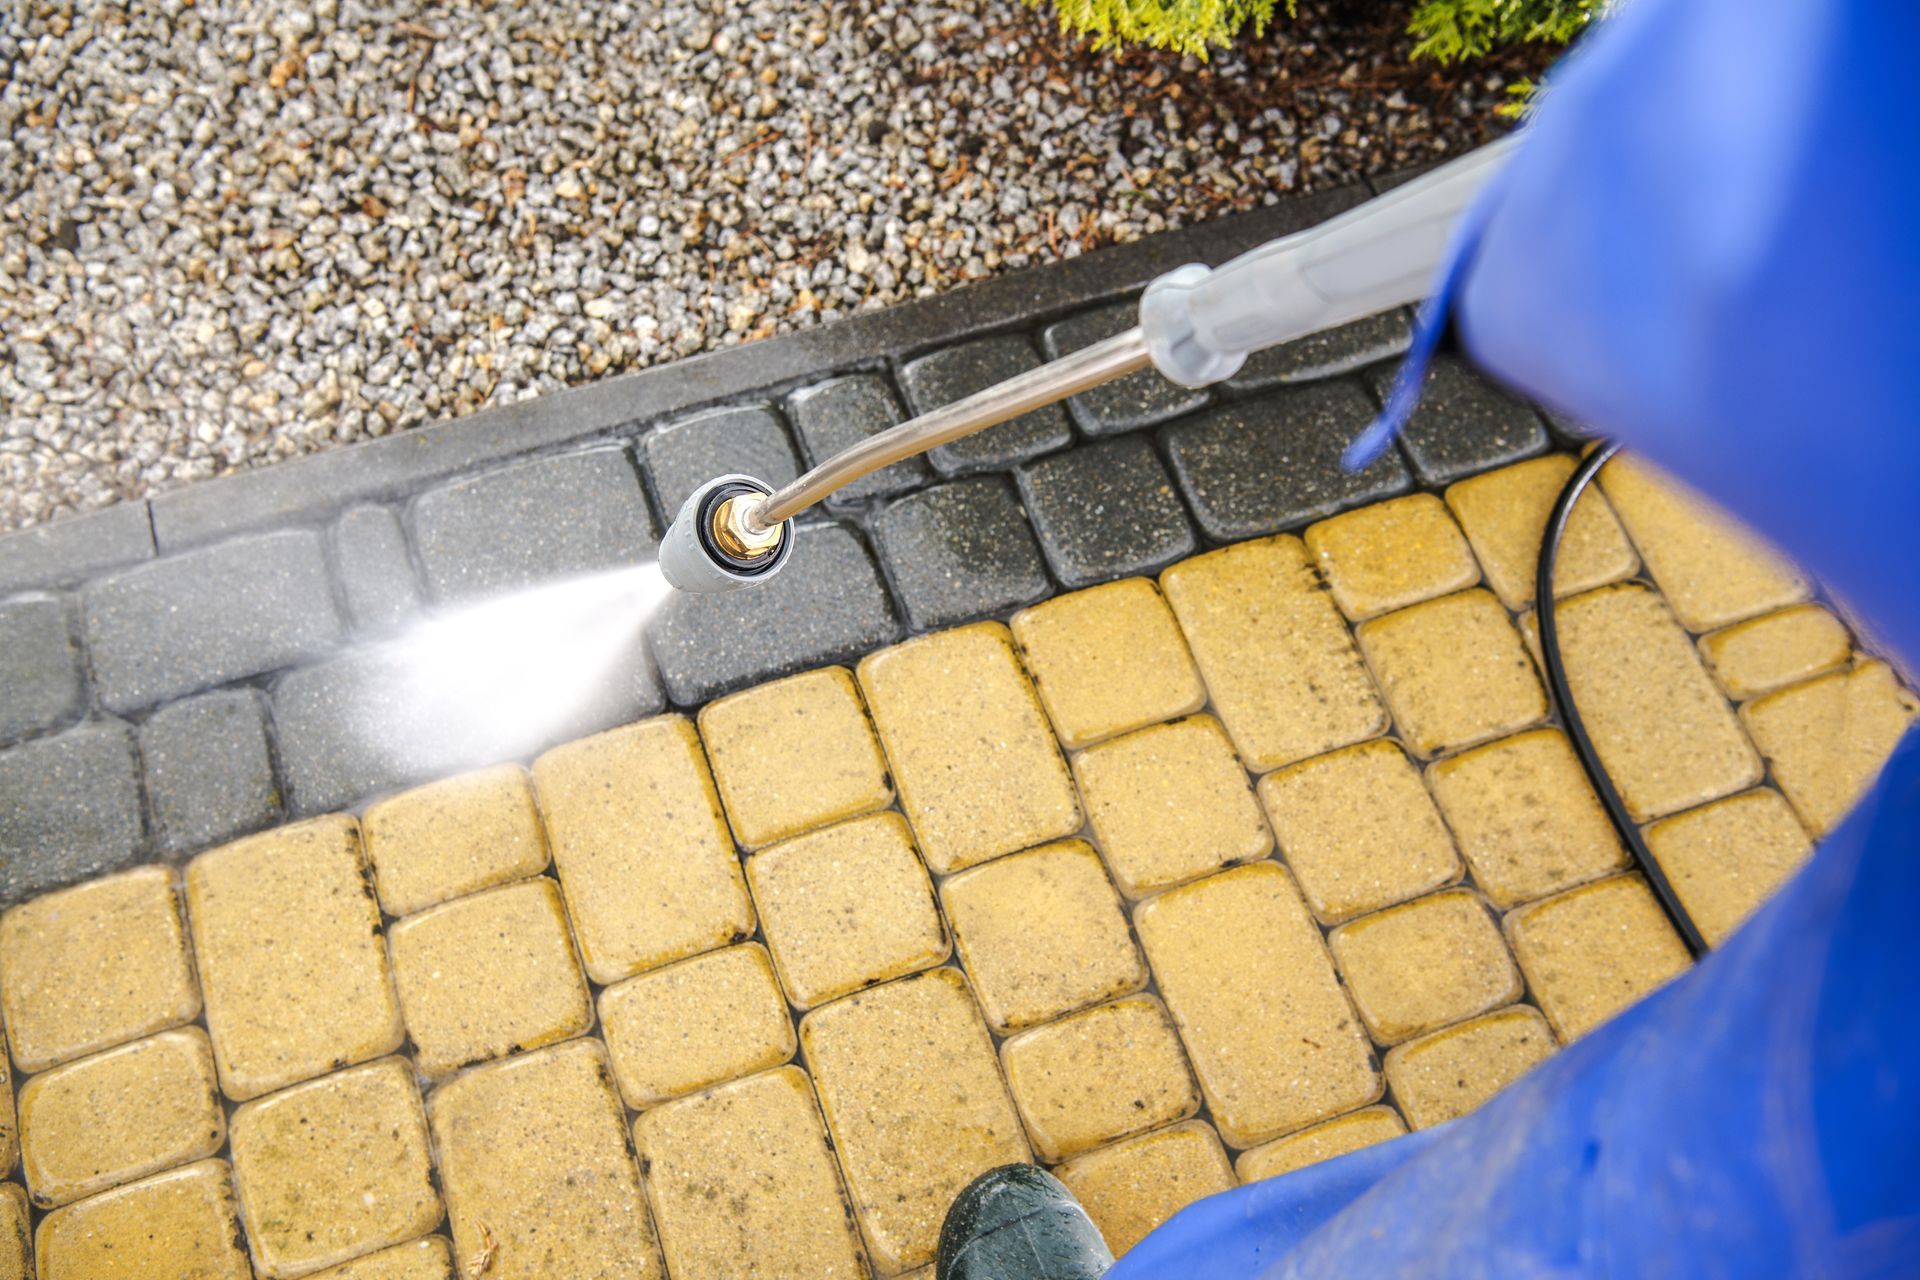 a person is cleaning a brick paver with a high pressure washer